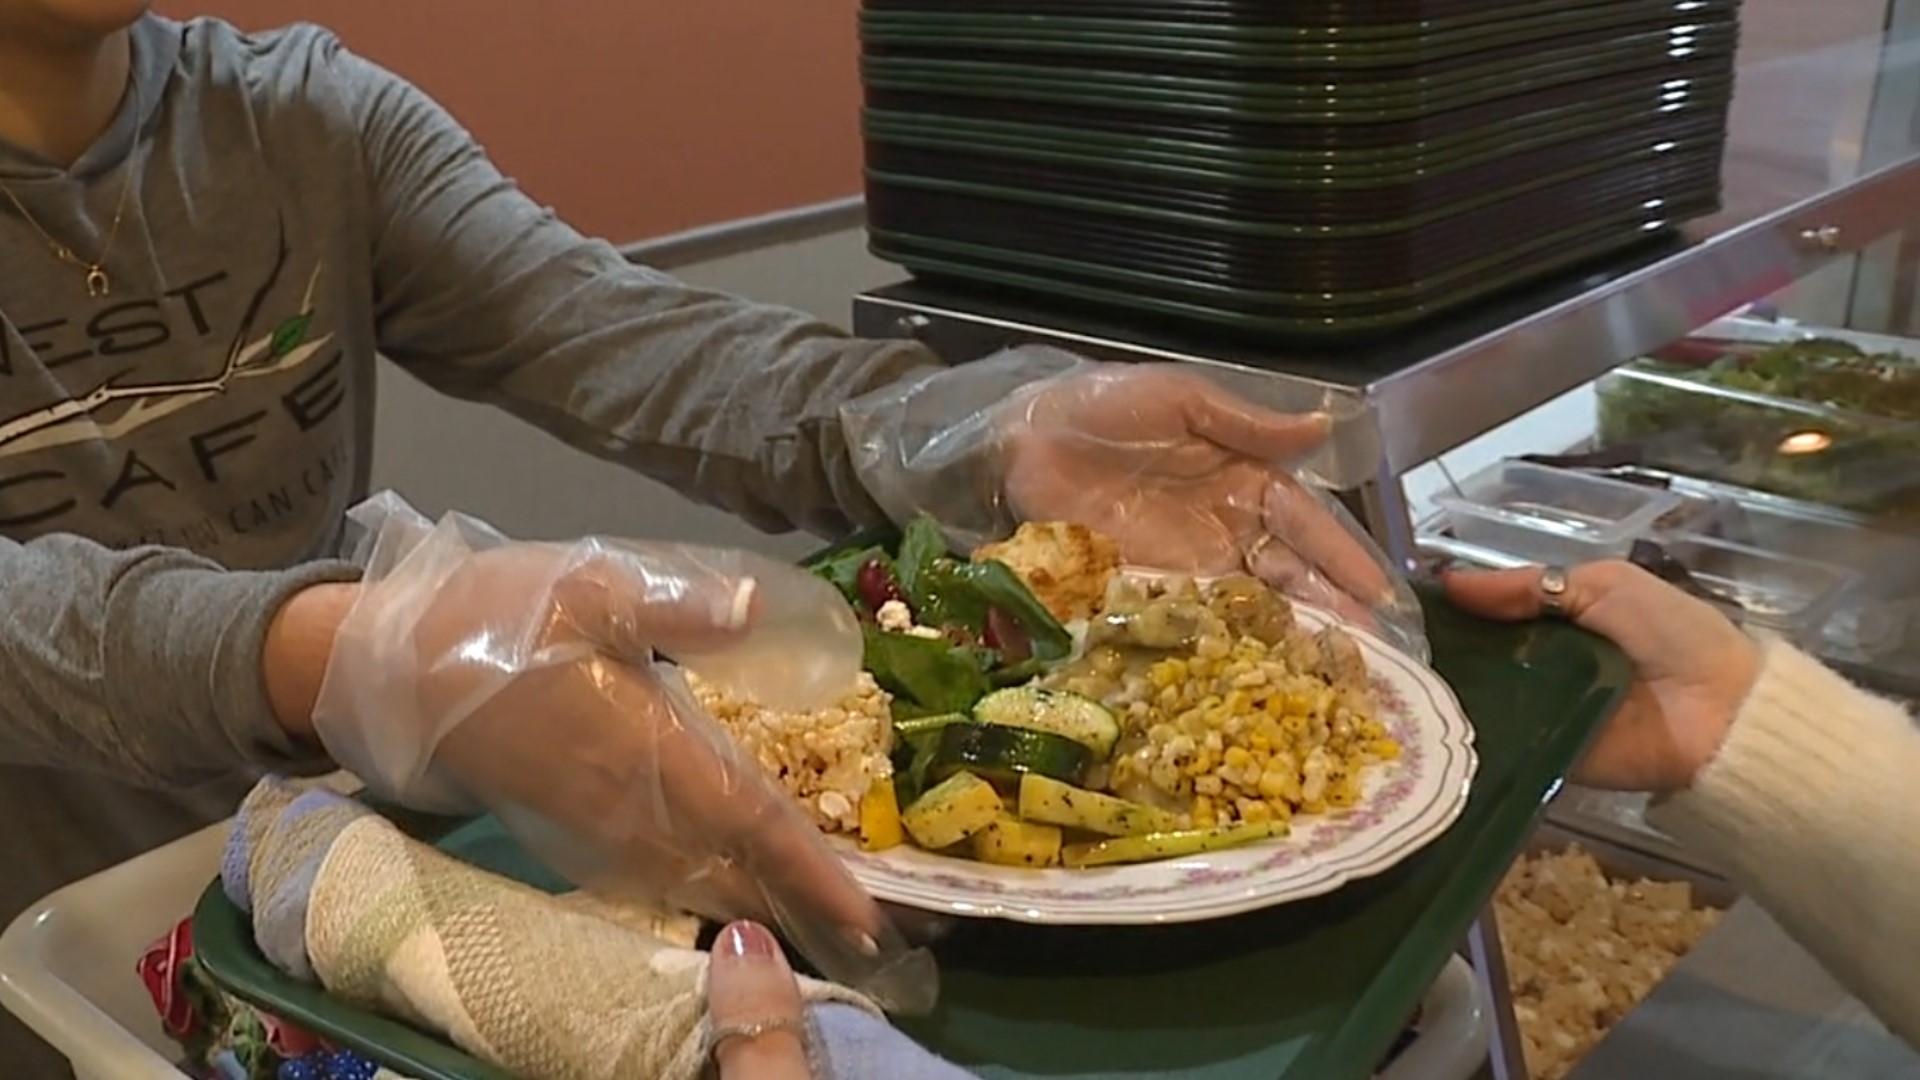 The cafe's brick-and-mortar Rock Island location will serve healthy meals five days a week to those in need.